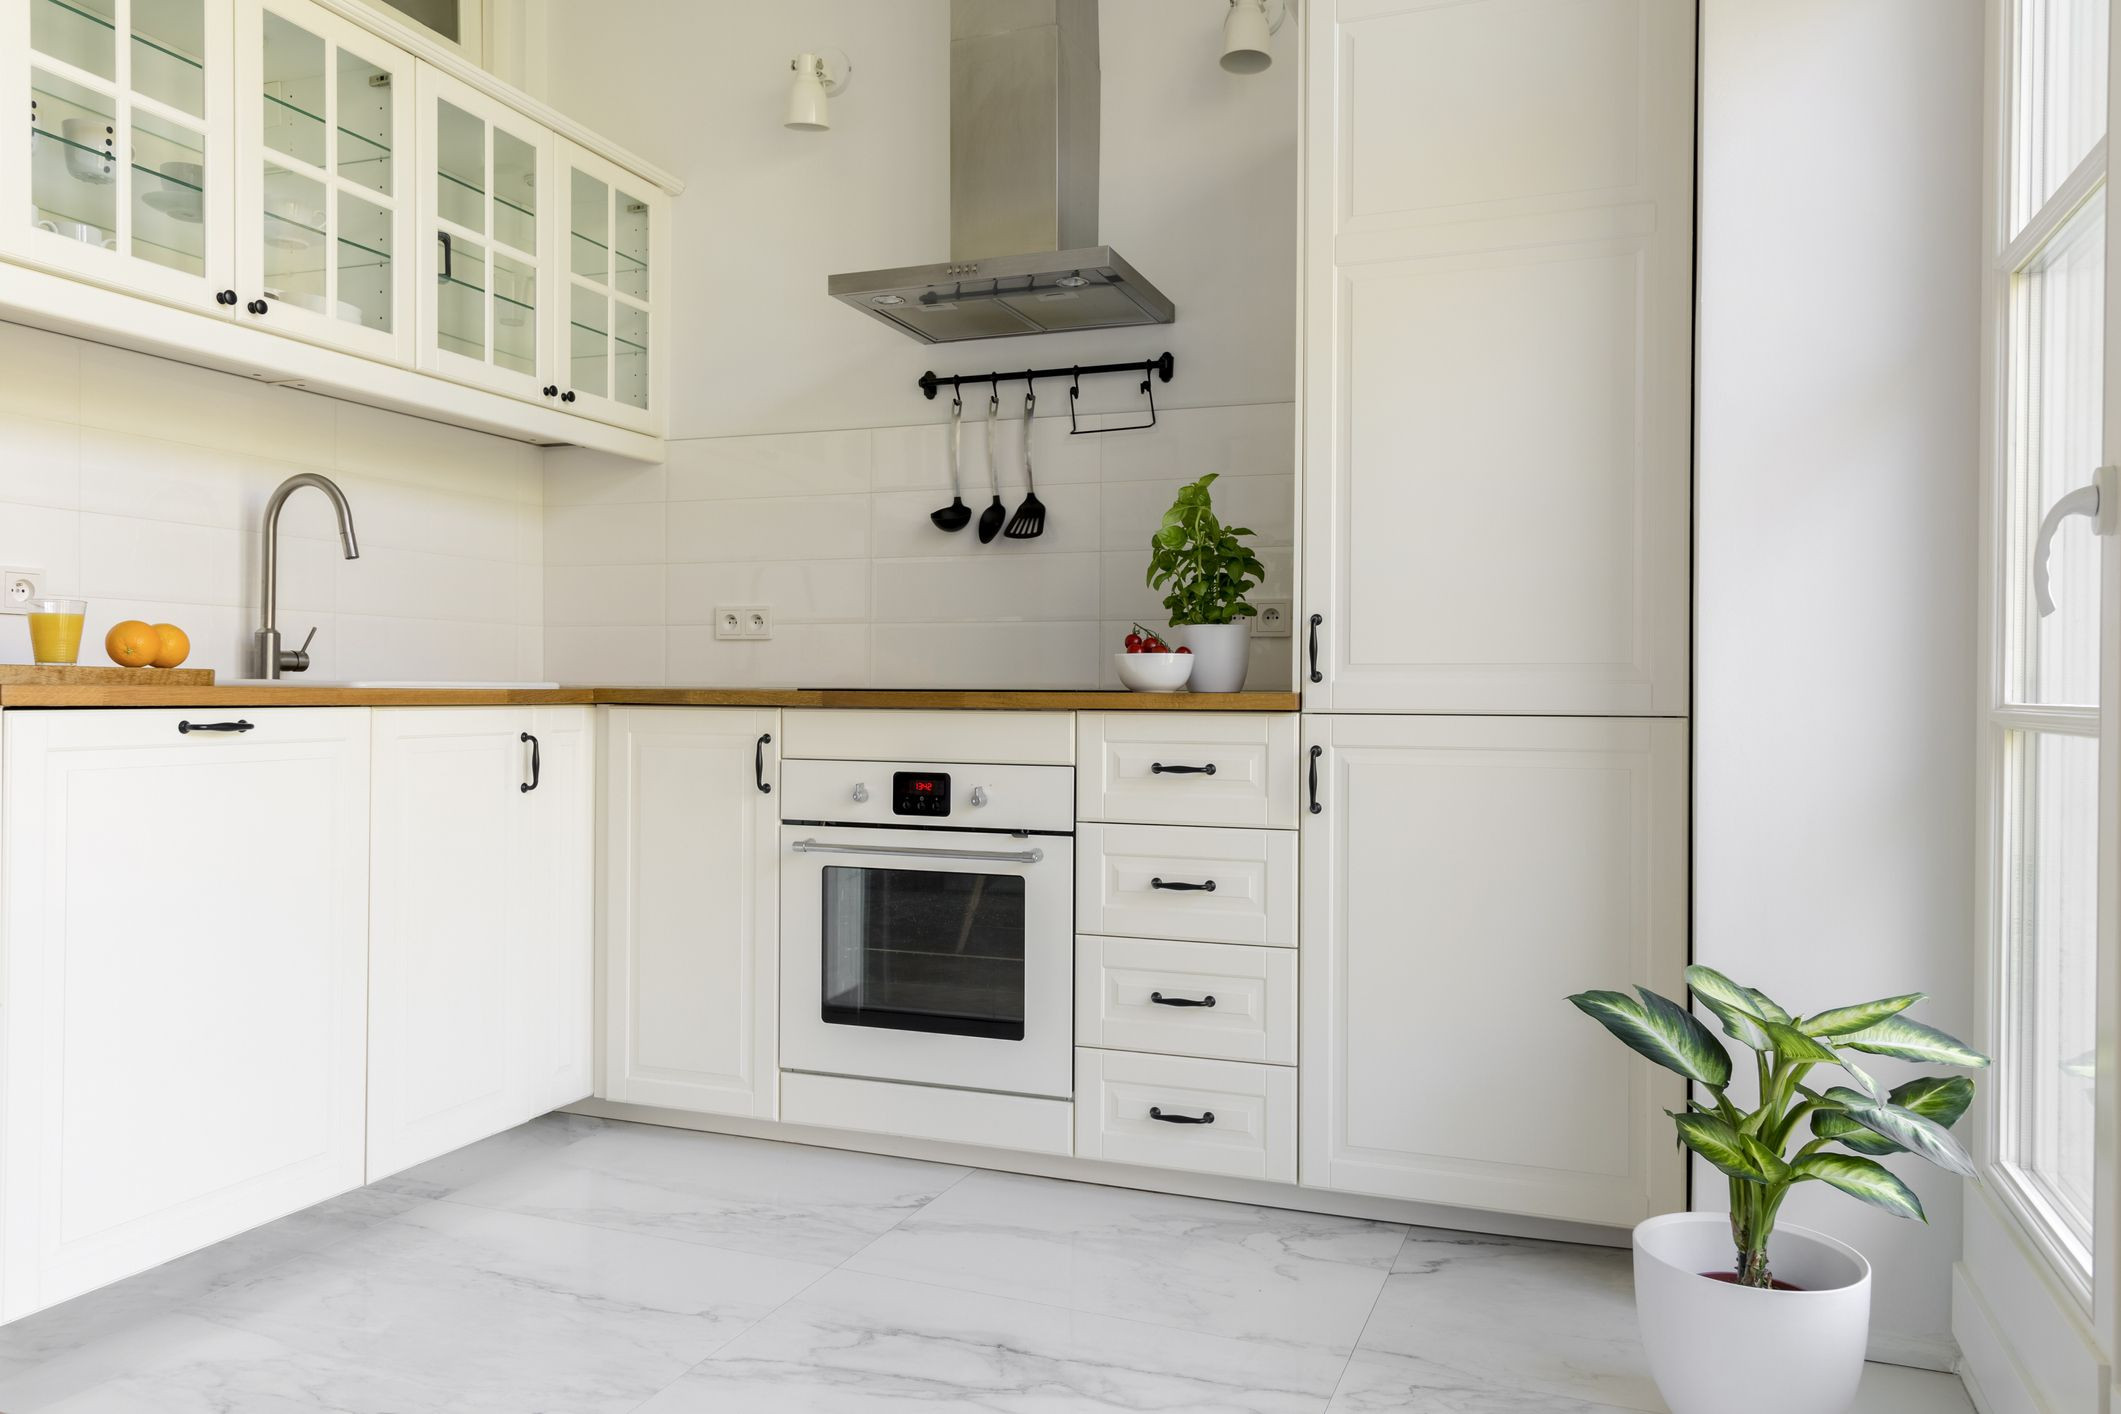 Floor In Kitchen
 Pros and Cons of Marble Flooring in Kitchens